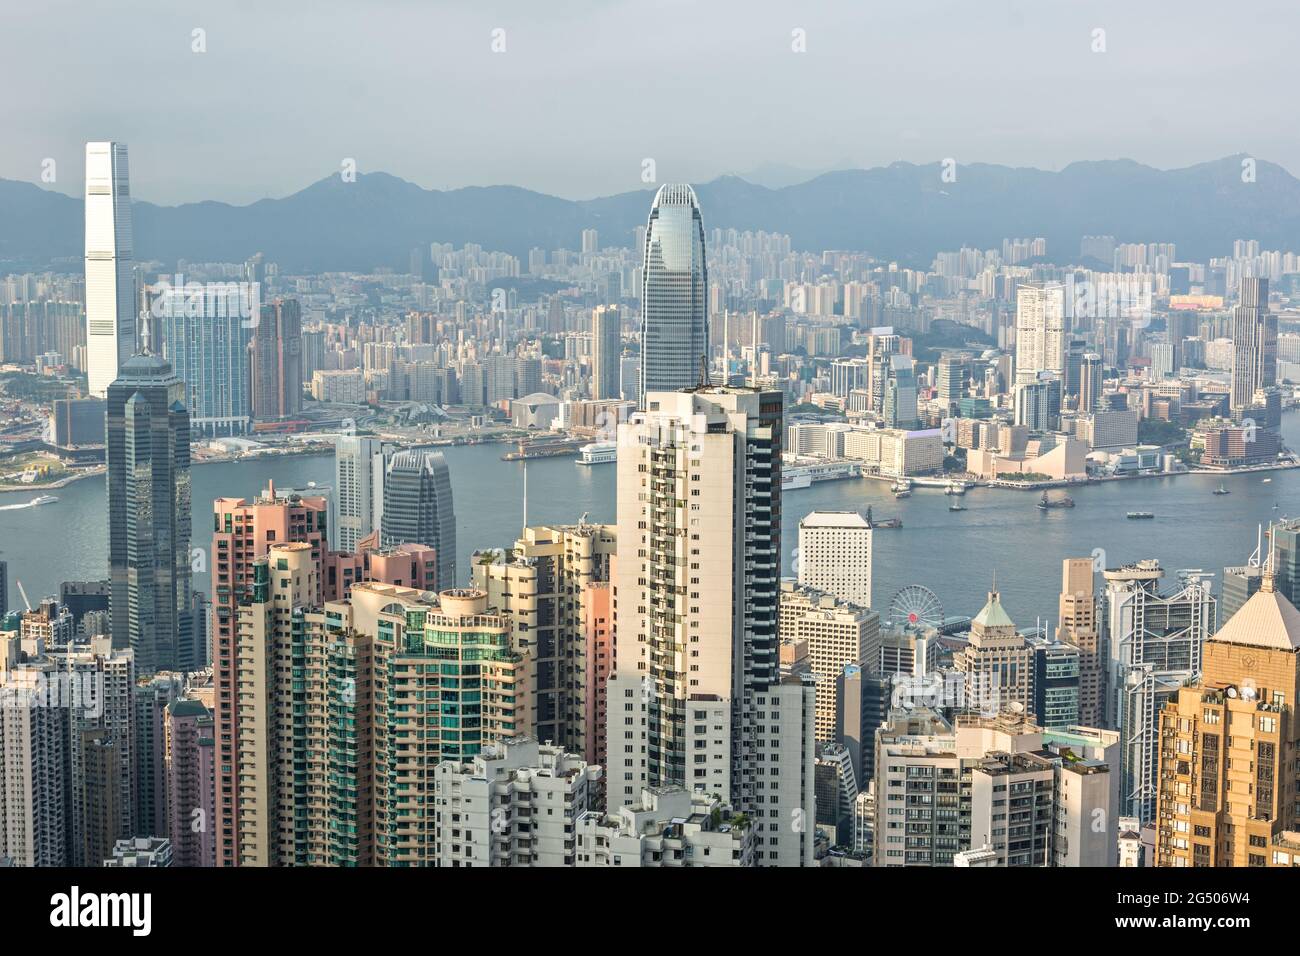 Skyline and skyscrapers of the city of Hong Kong Stock Photo